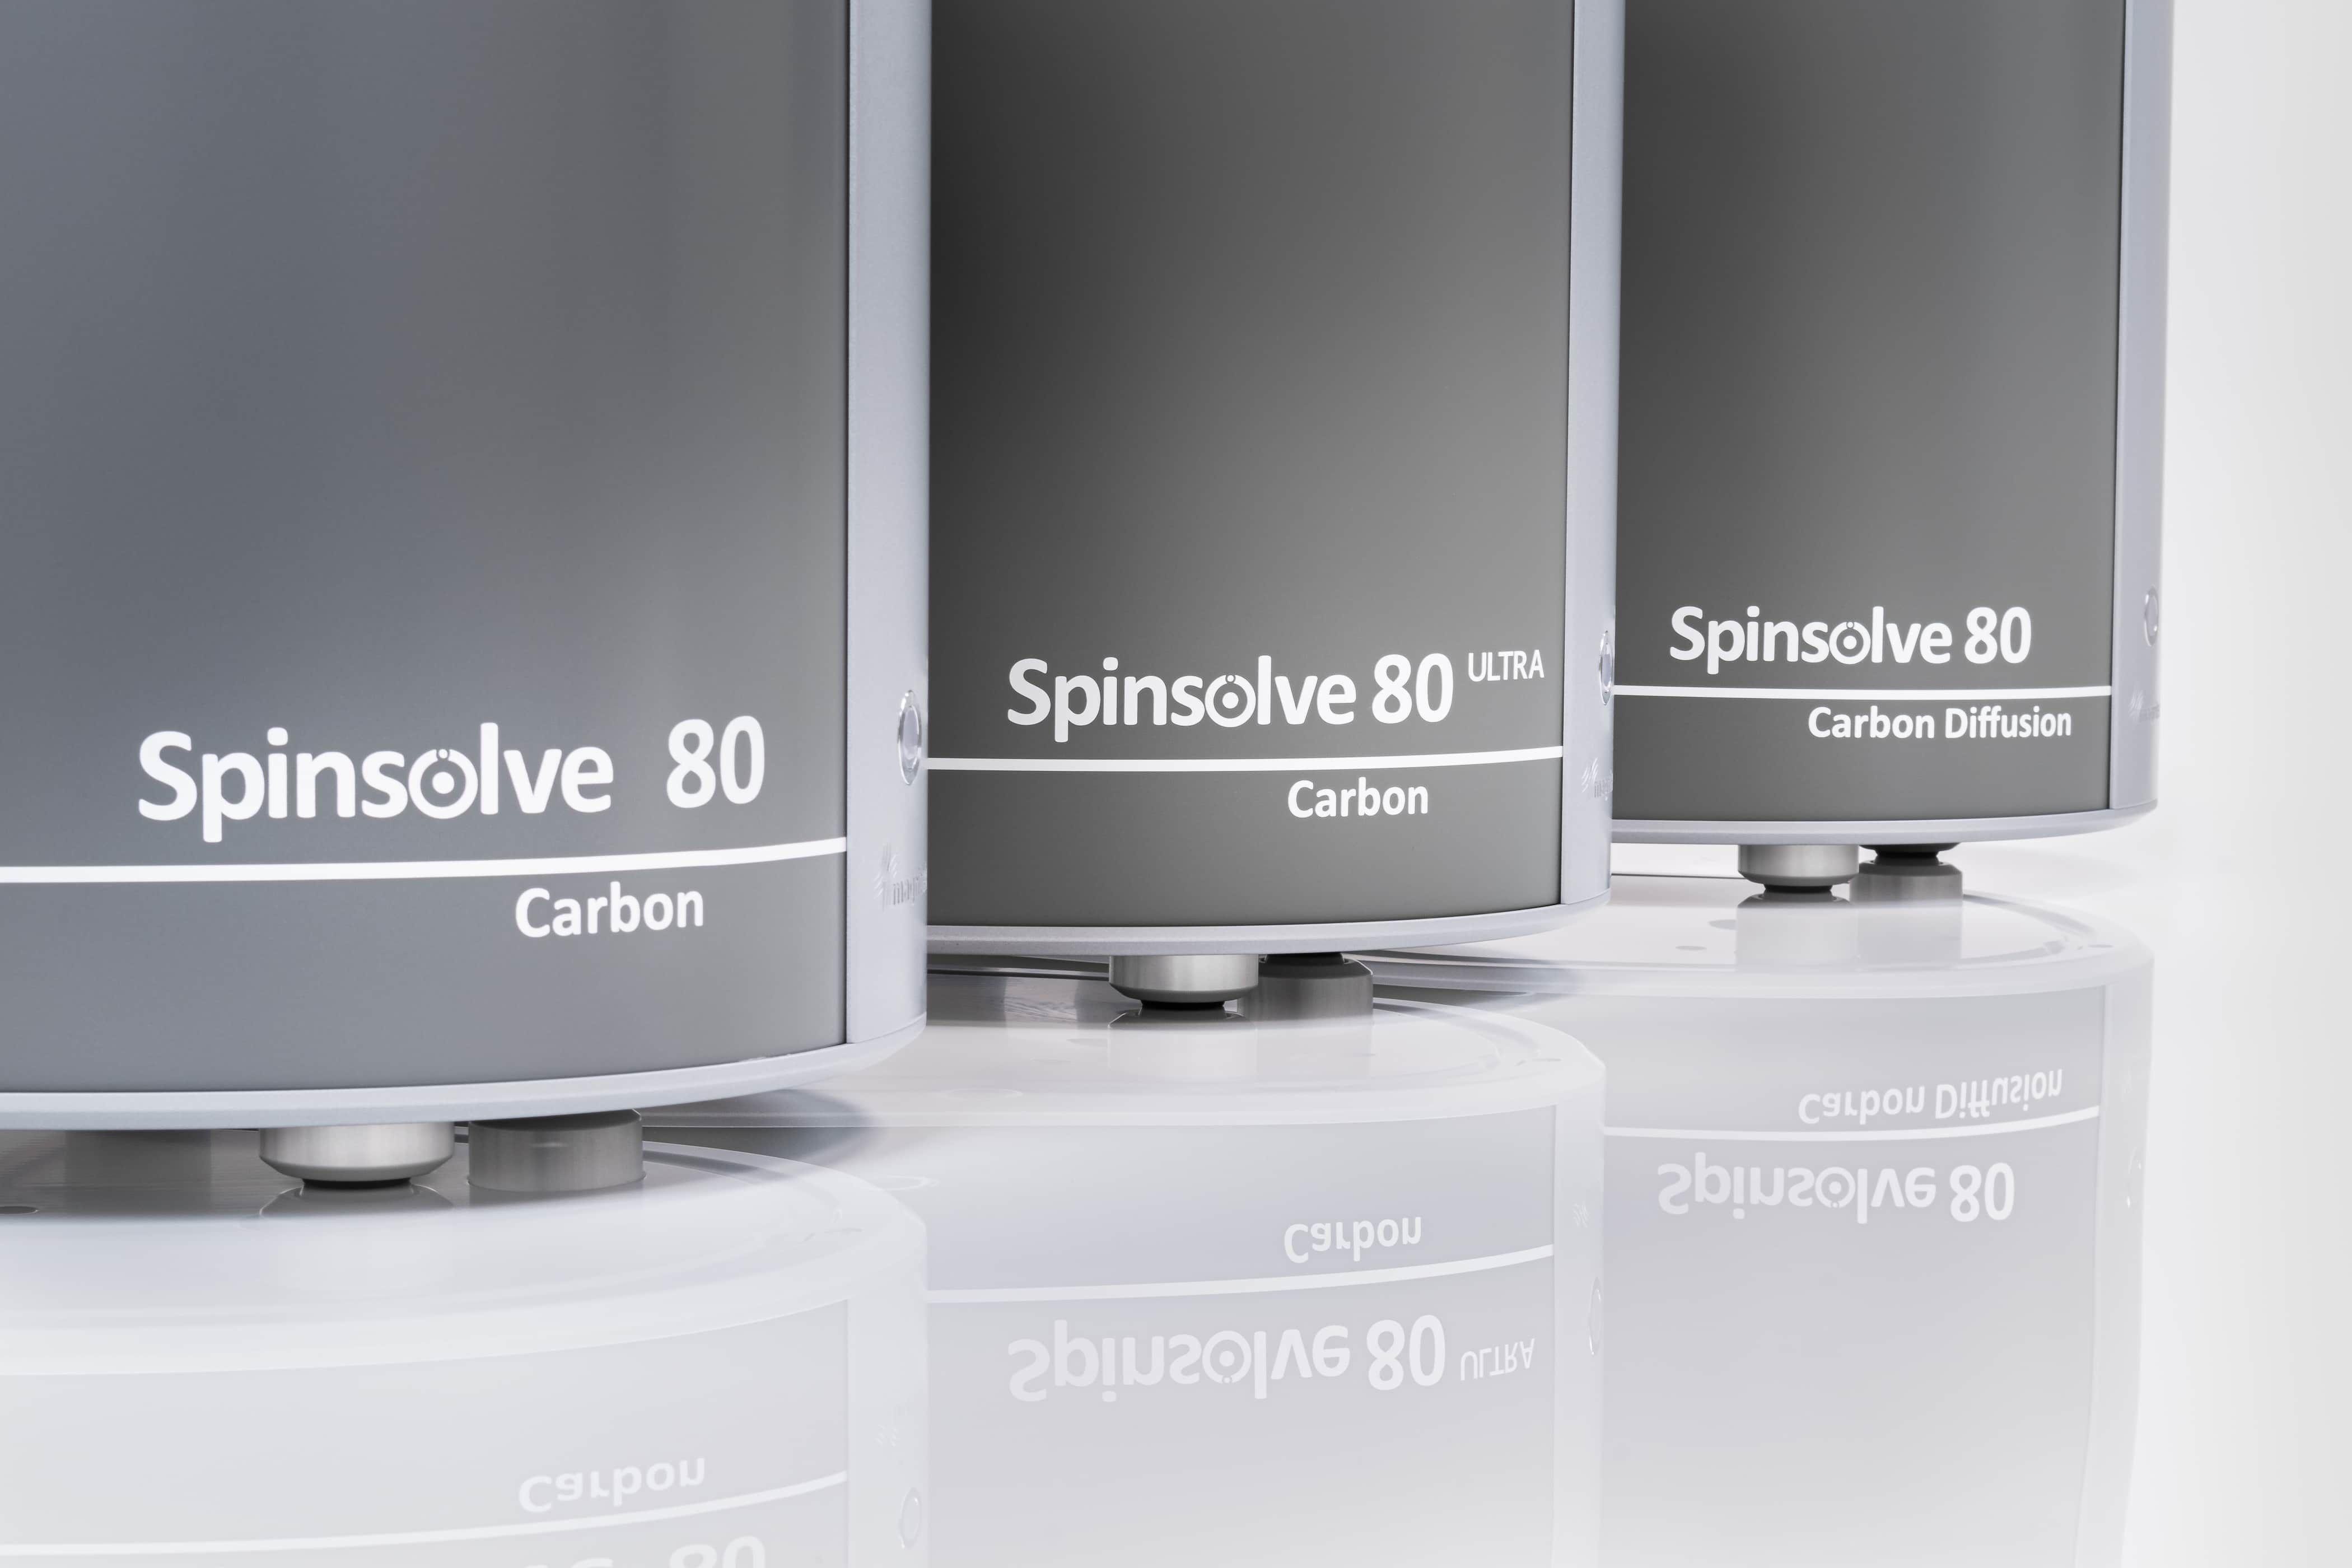 Spinsolve 80 Carbon ULTRA benchtop NMR